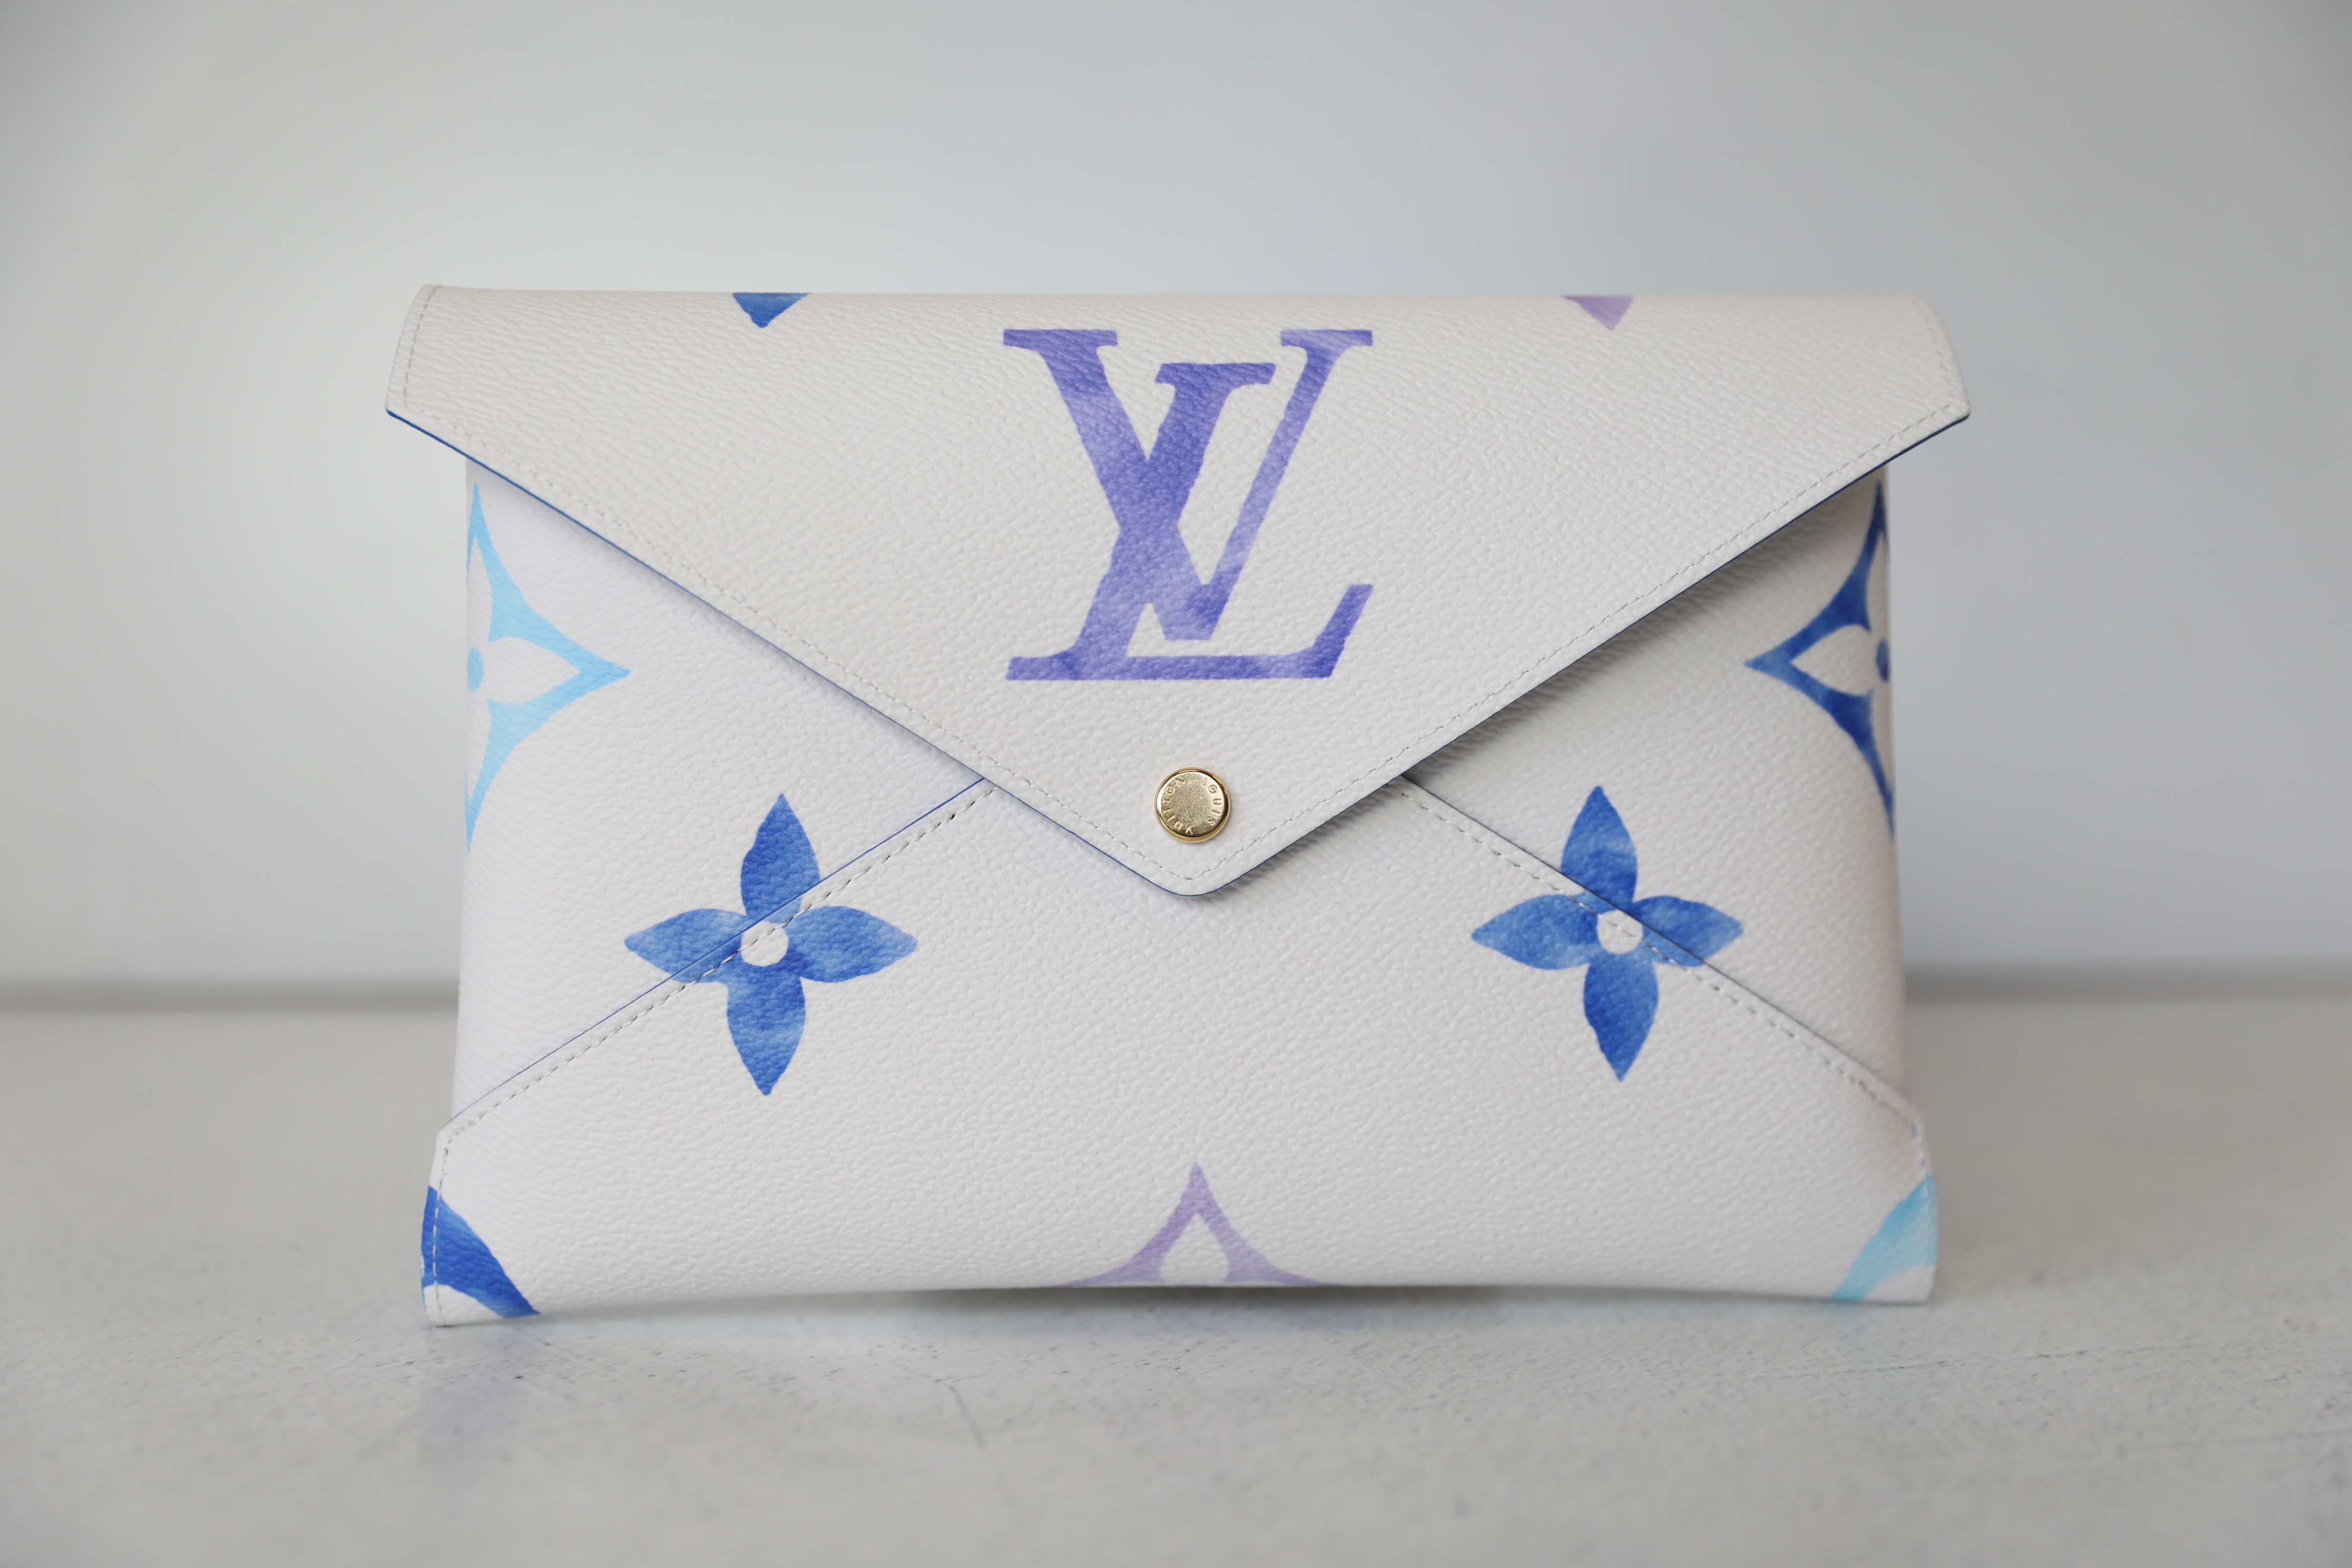 Louis Vuitton Kirigami Pouch Large, Blue and White, New in Box WA001